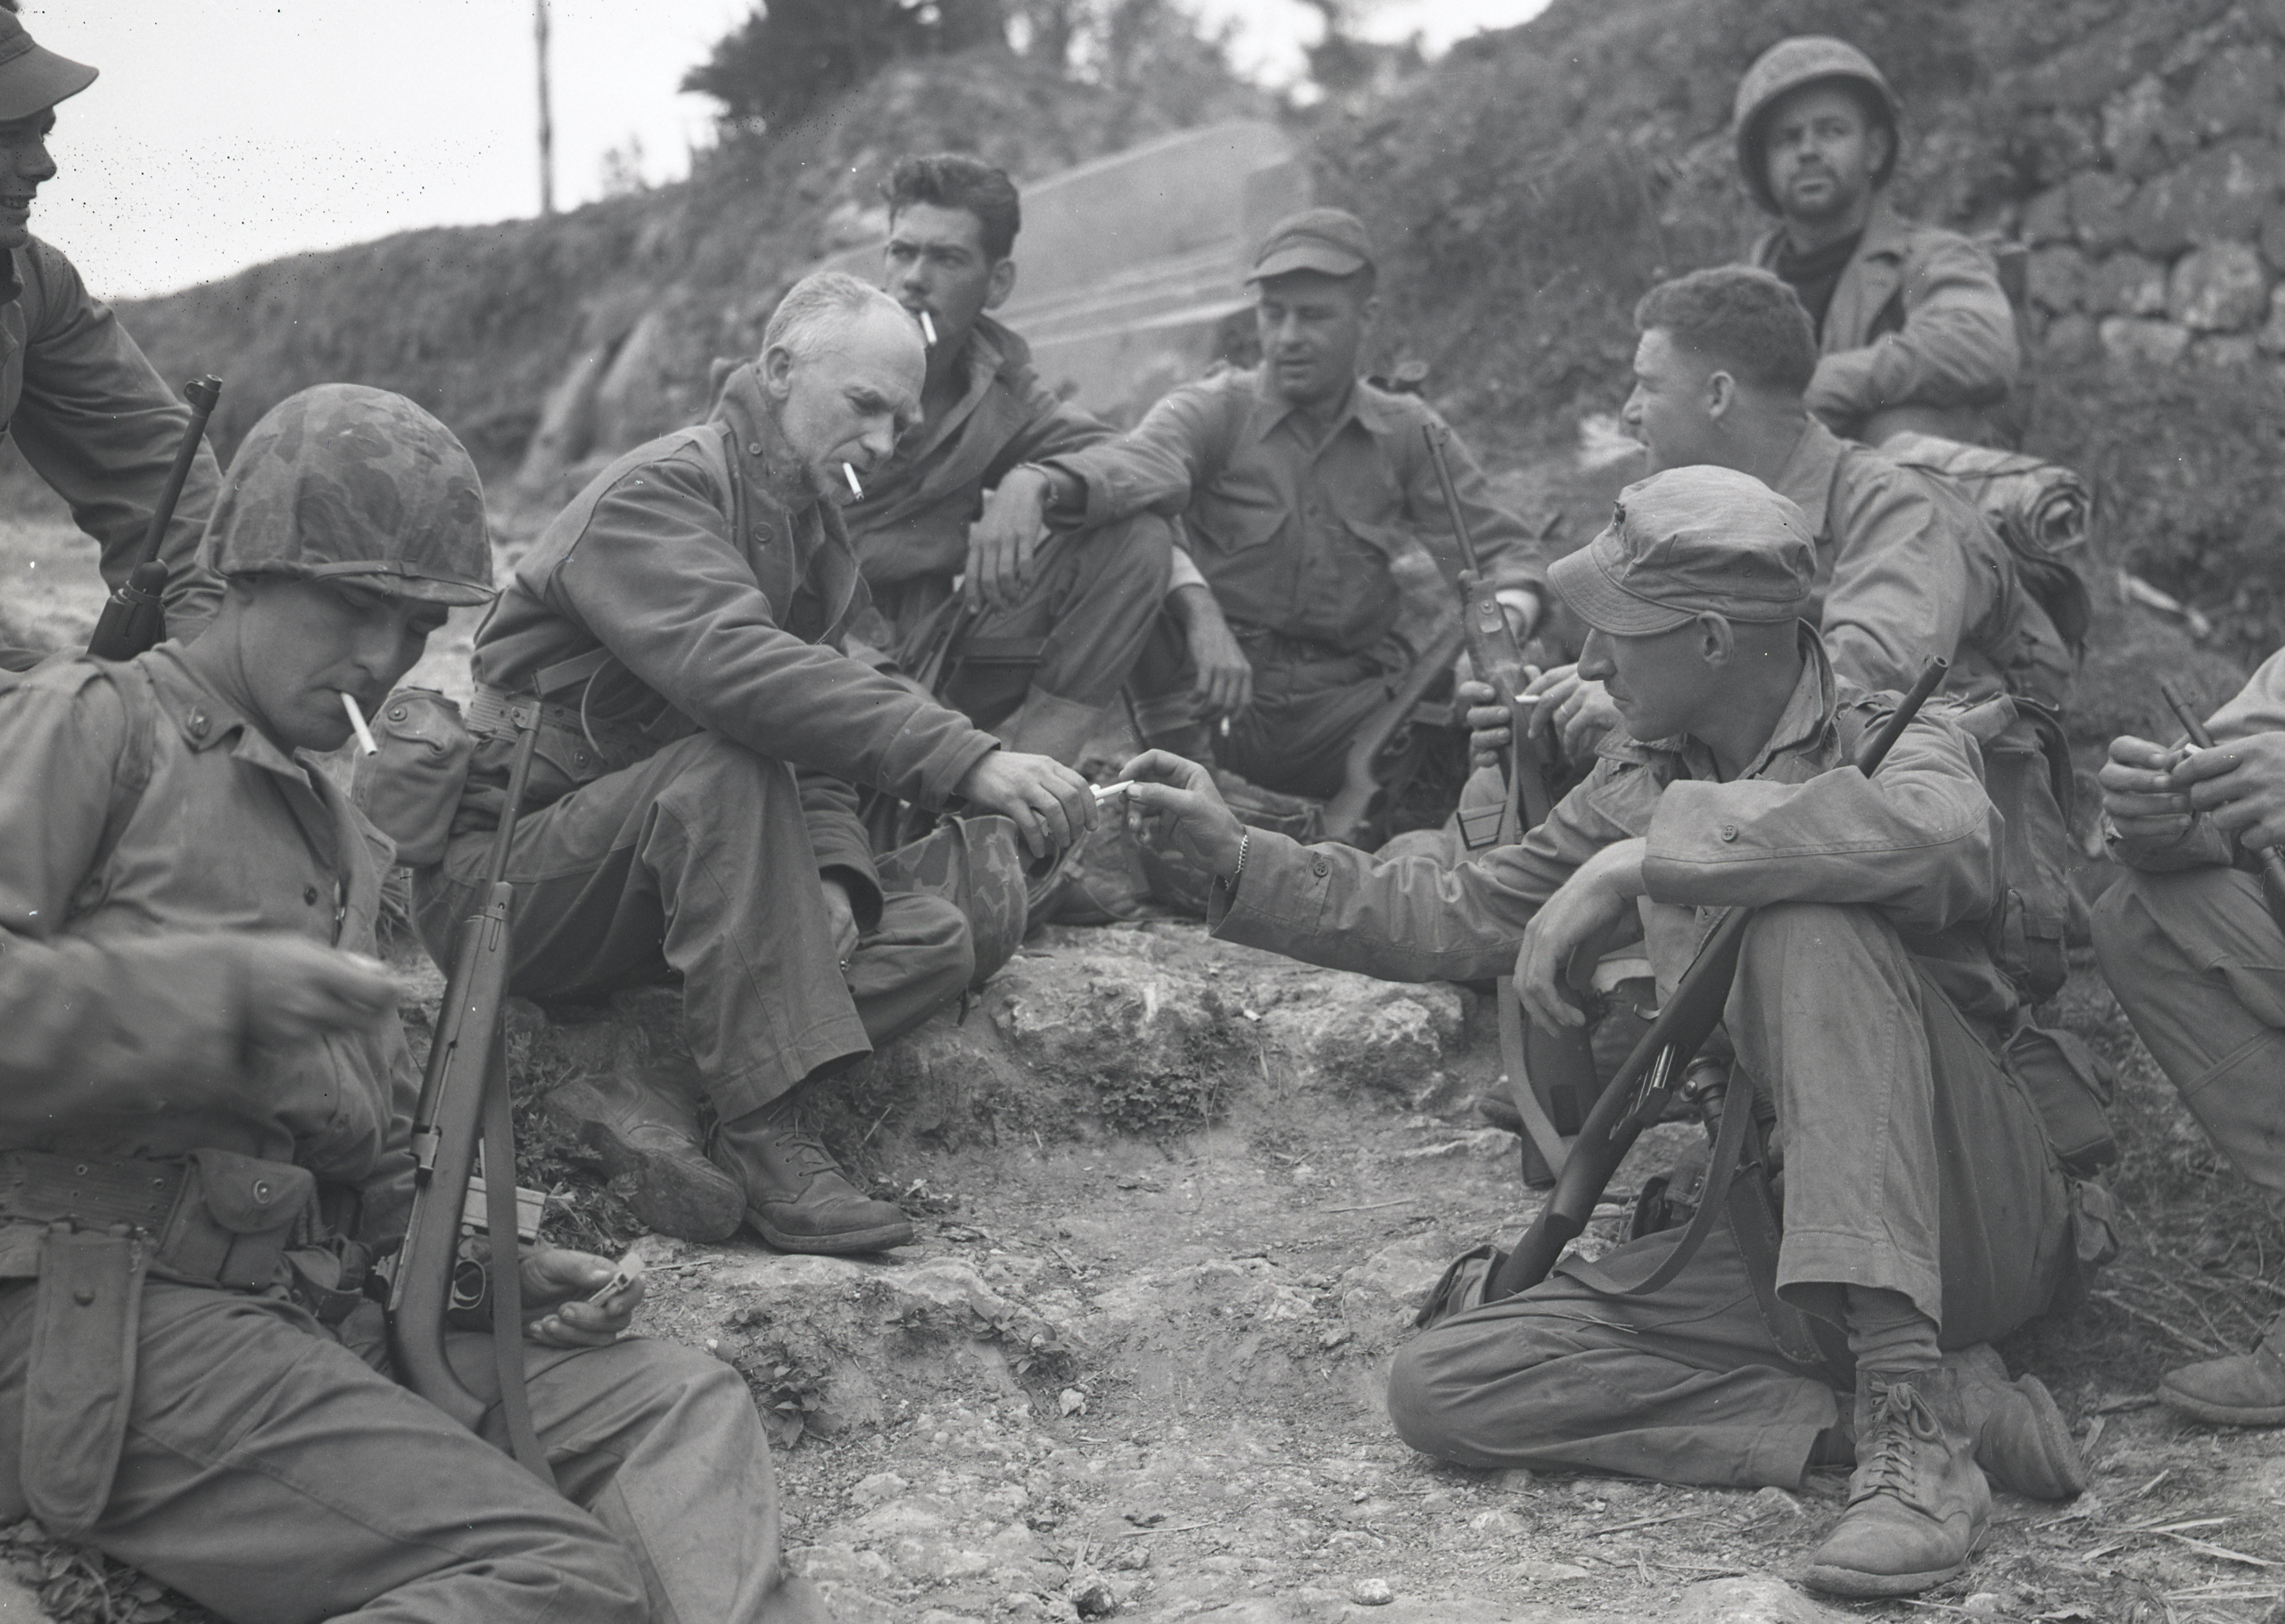 Ernie Pyle (center left) shares cigarettes with U.S. Marines by a roadside on Okinawa on April 8, 1945, not long before his death. / U.S. National Archives